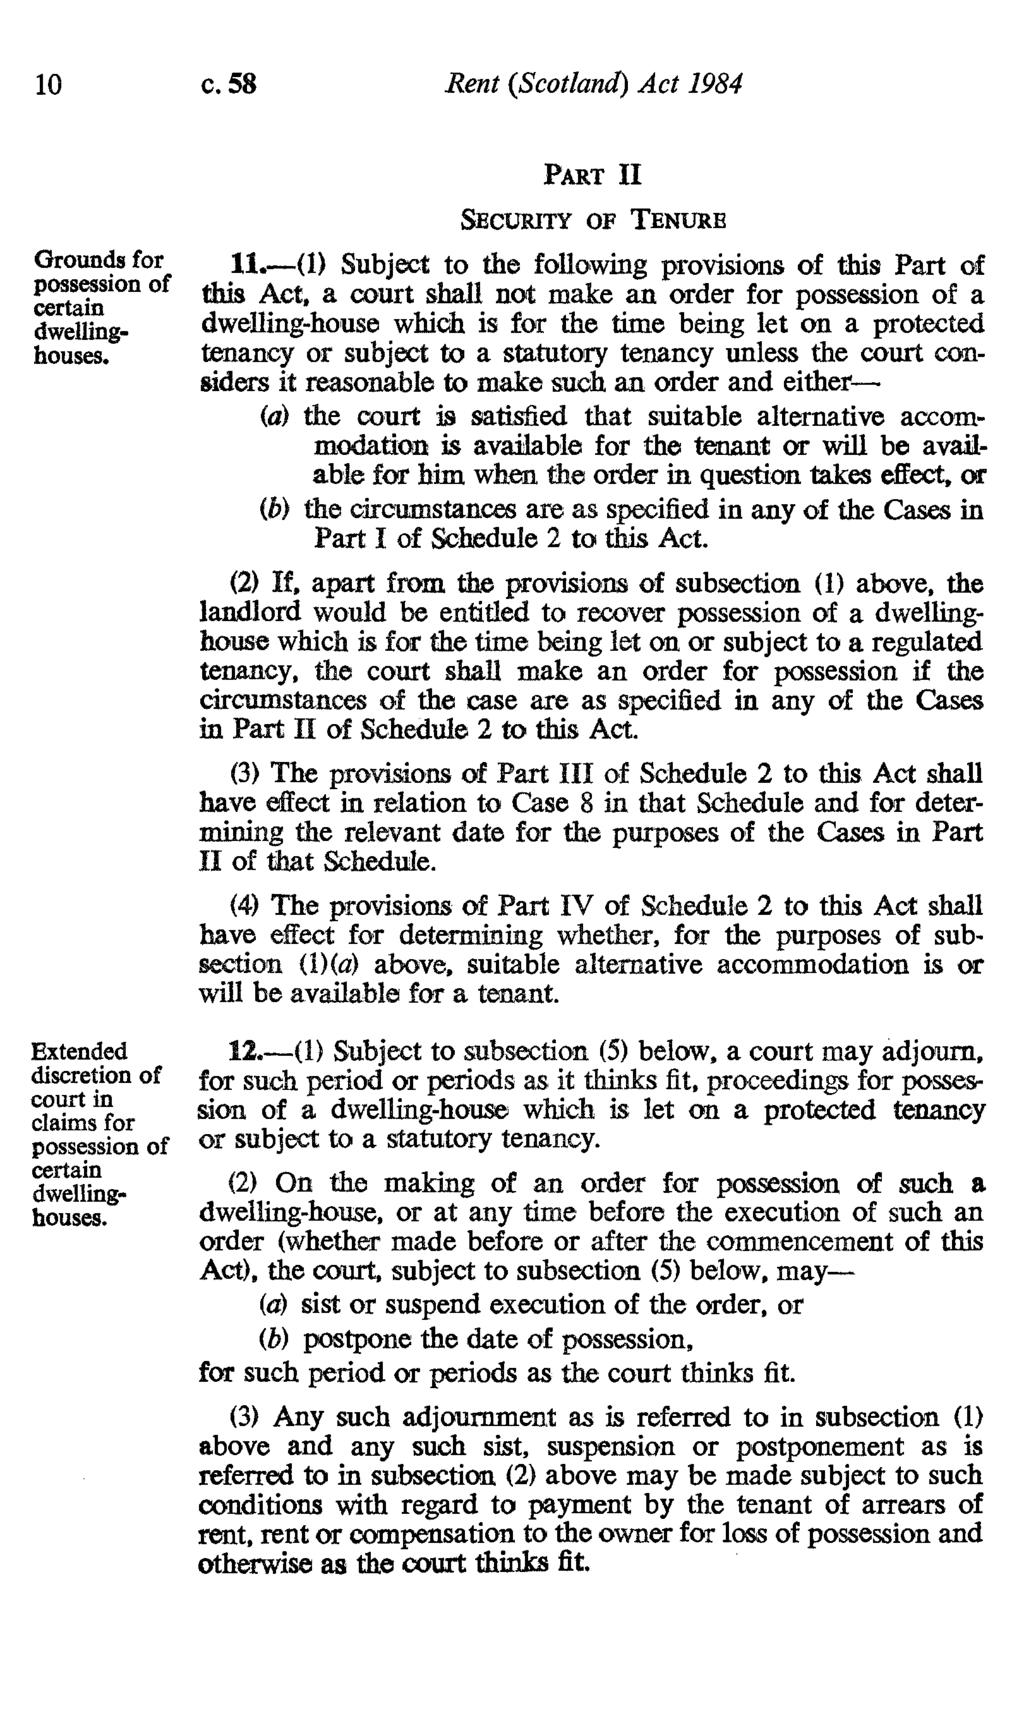 10 c. 58 Rent (Scotland) Act 1984 PART II Grounds for possession of certain dwellinghouses. Extended discretion of court in claims for possession of certain dwellinghouses. SECURITY of TENURE 11.